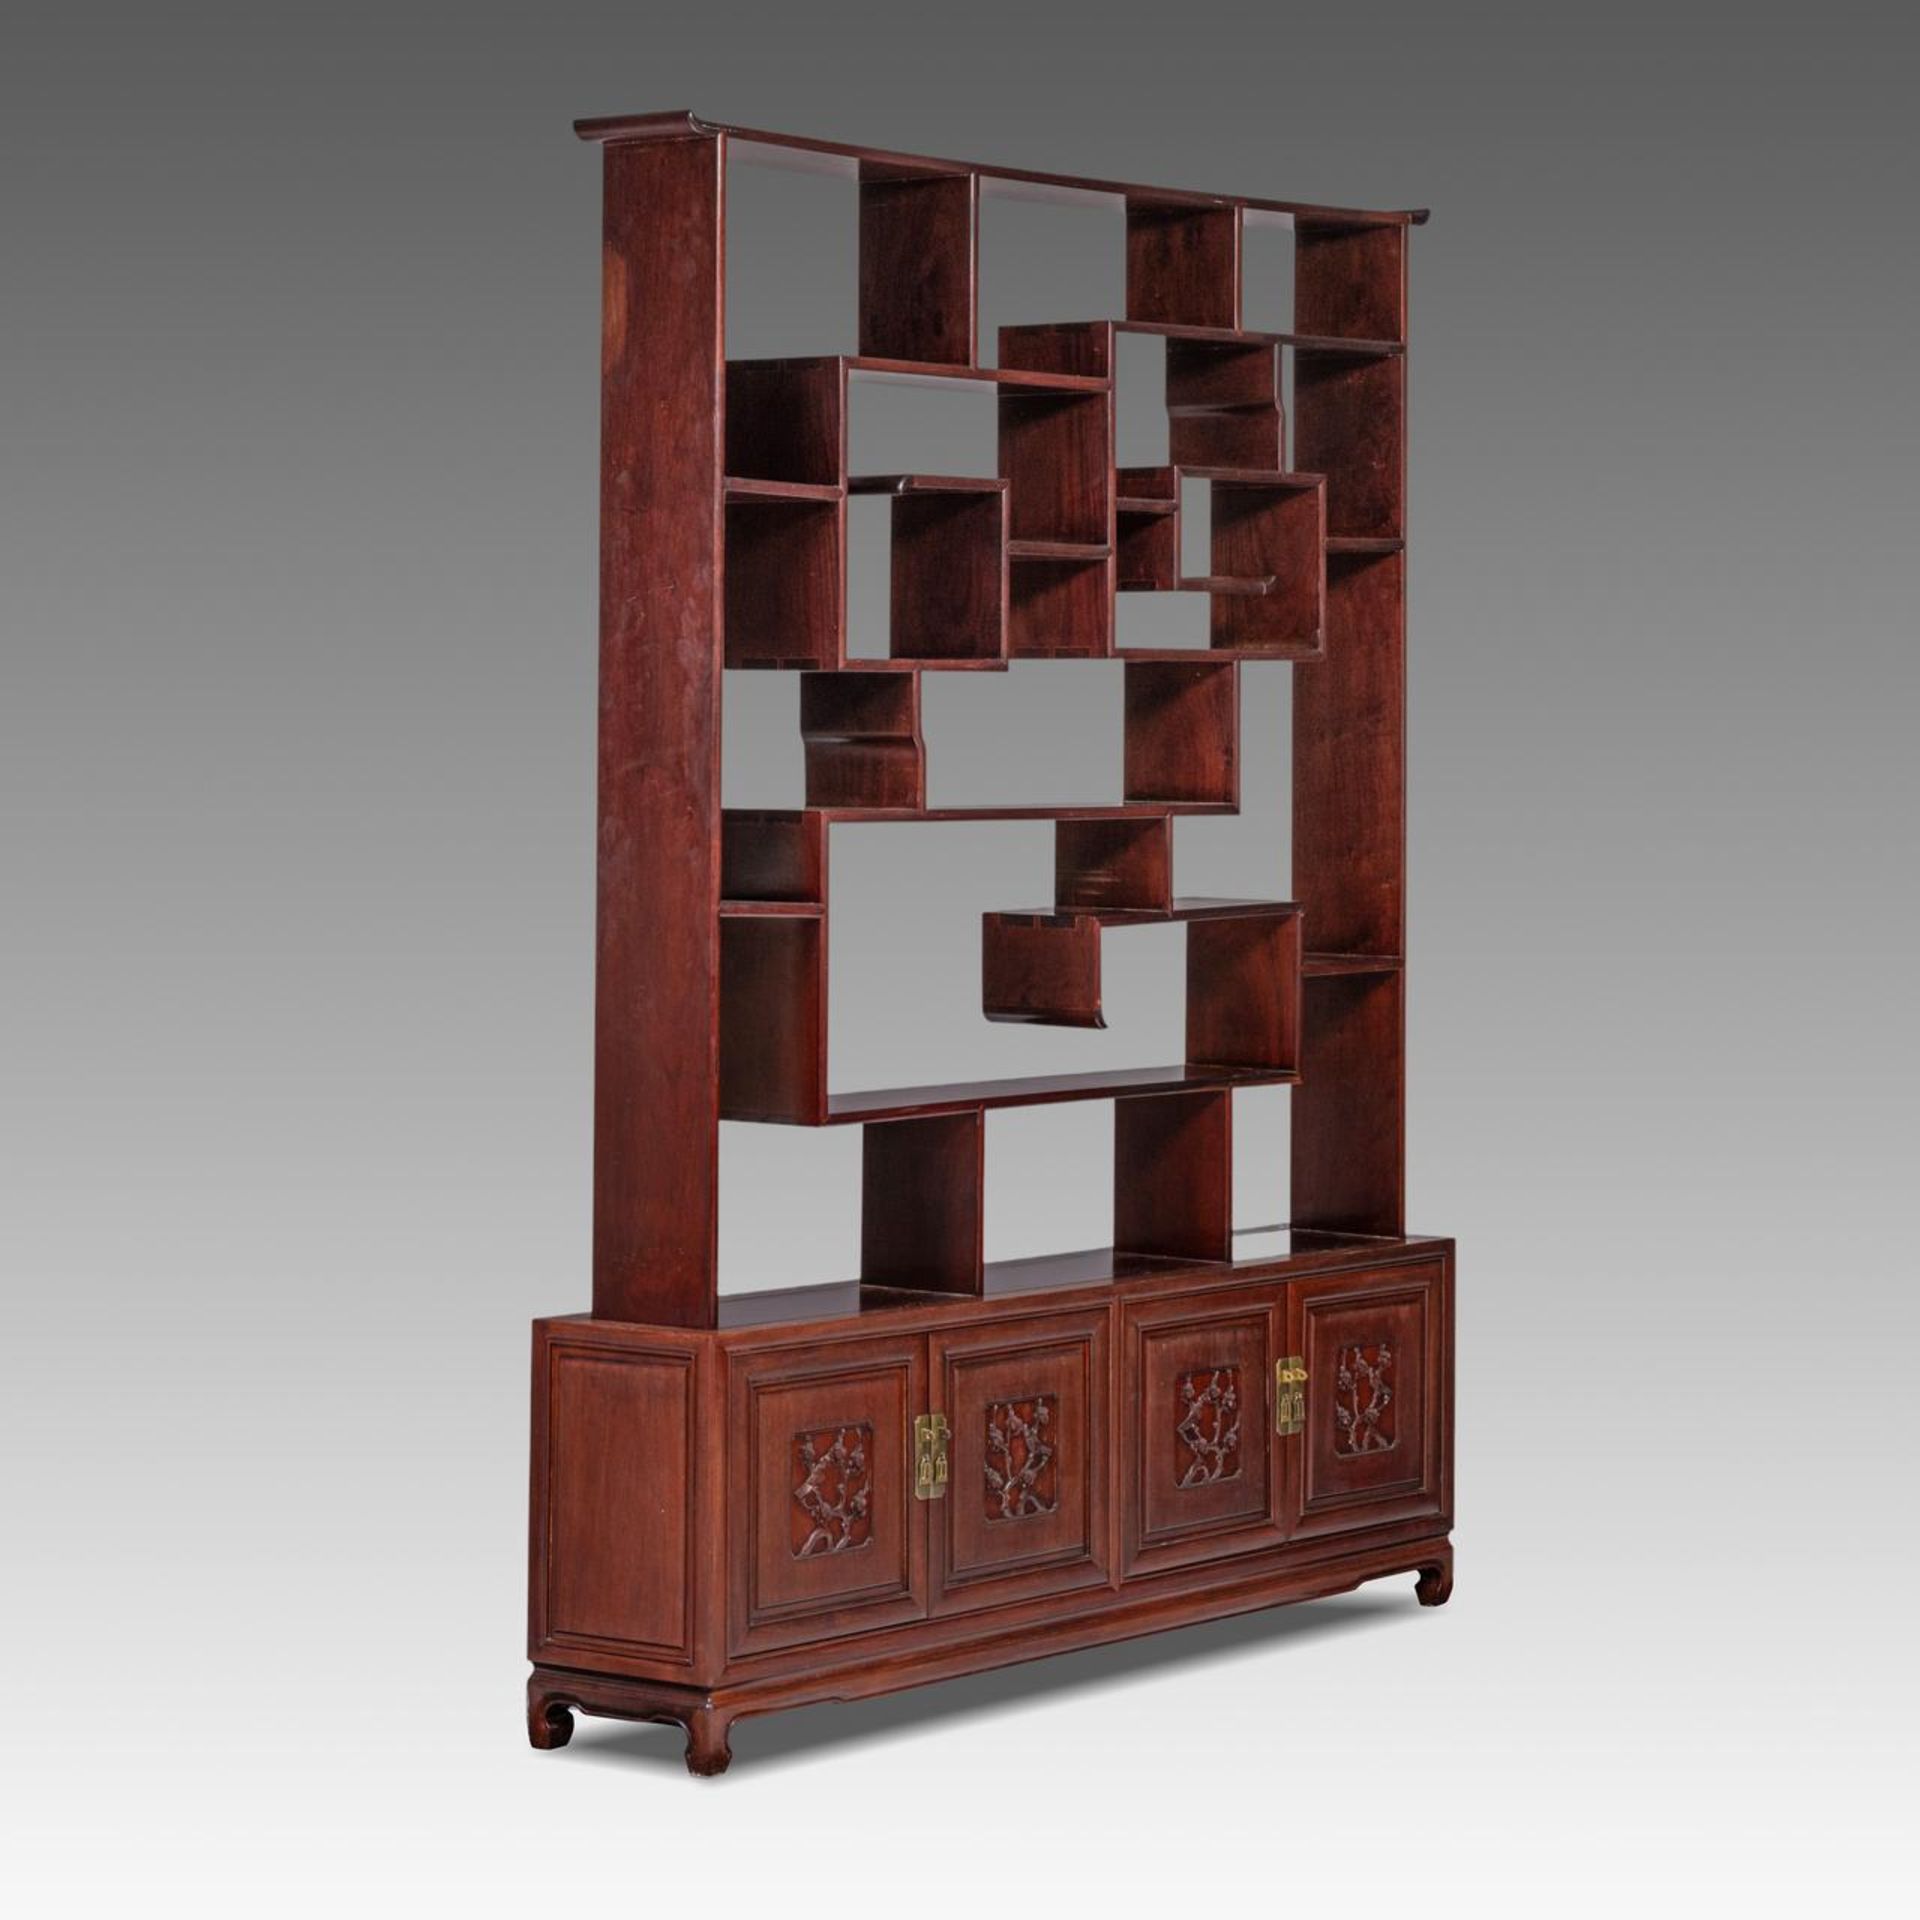 A Chinese hardwood display cabinet, 20thC, H 196 - W 151 - D 20 cm - Image 2 of 4